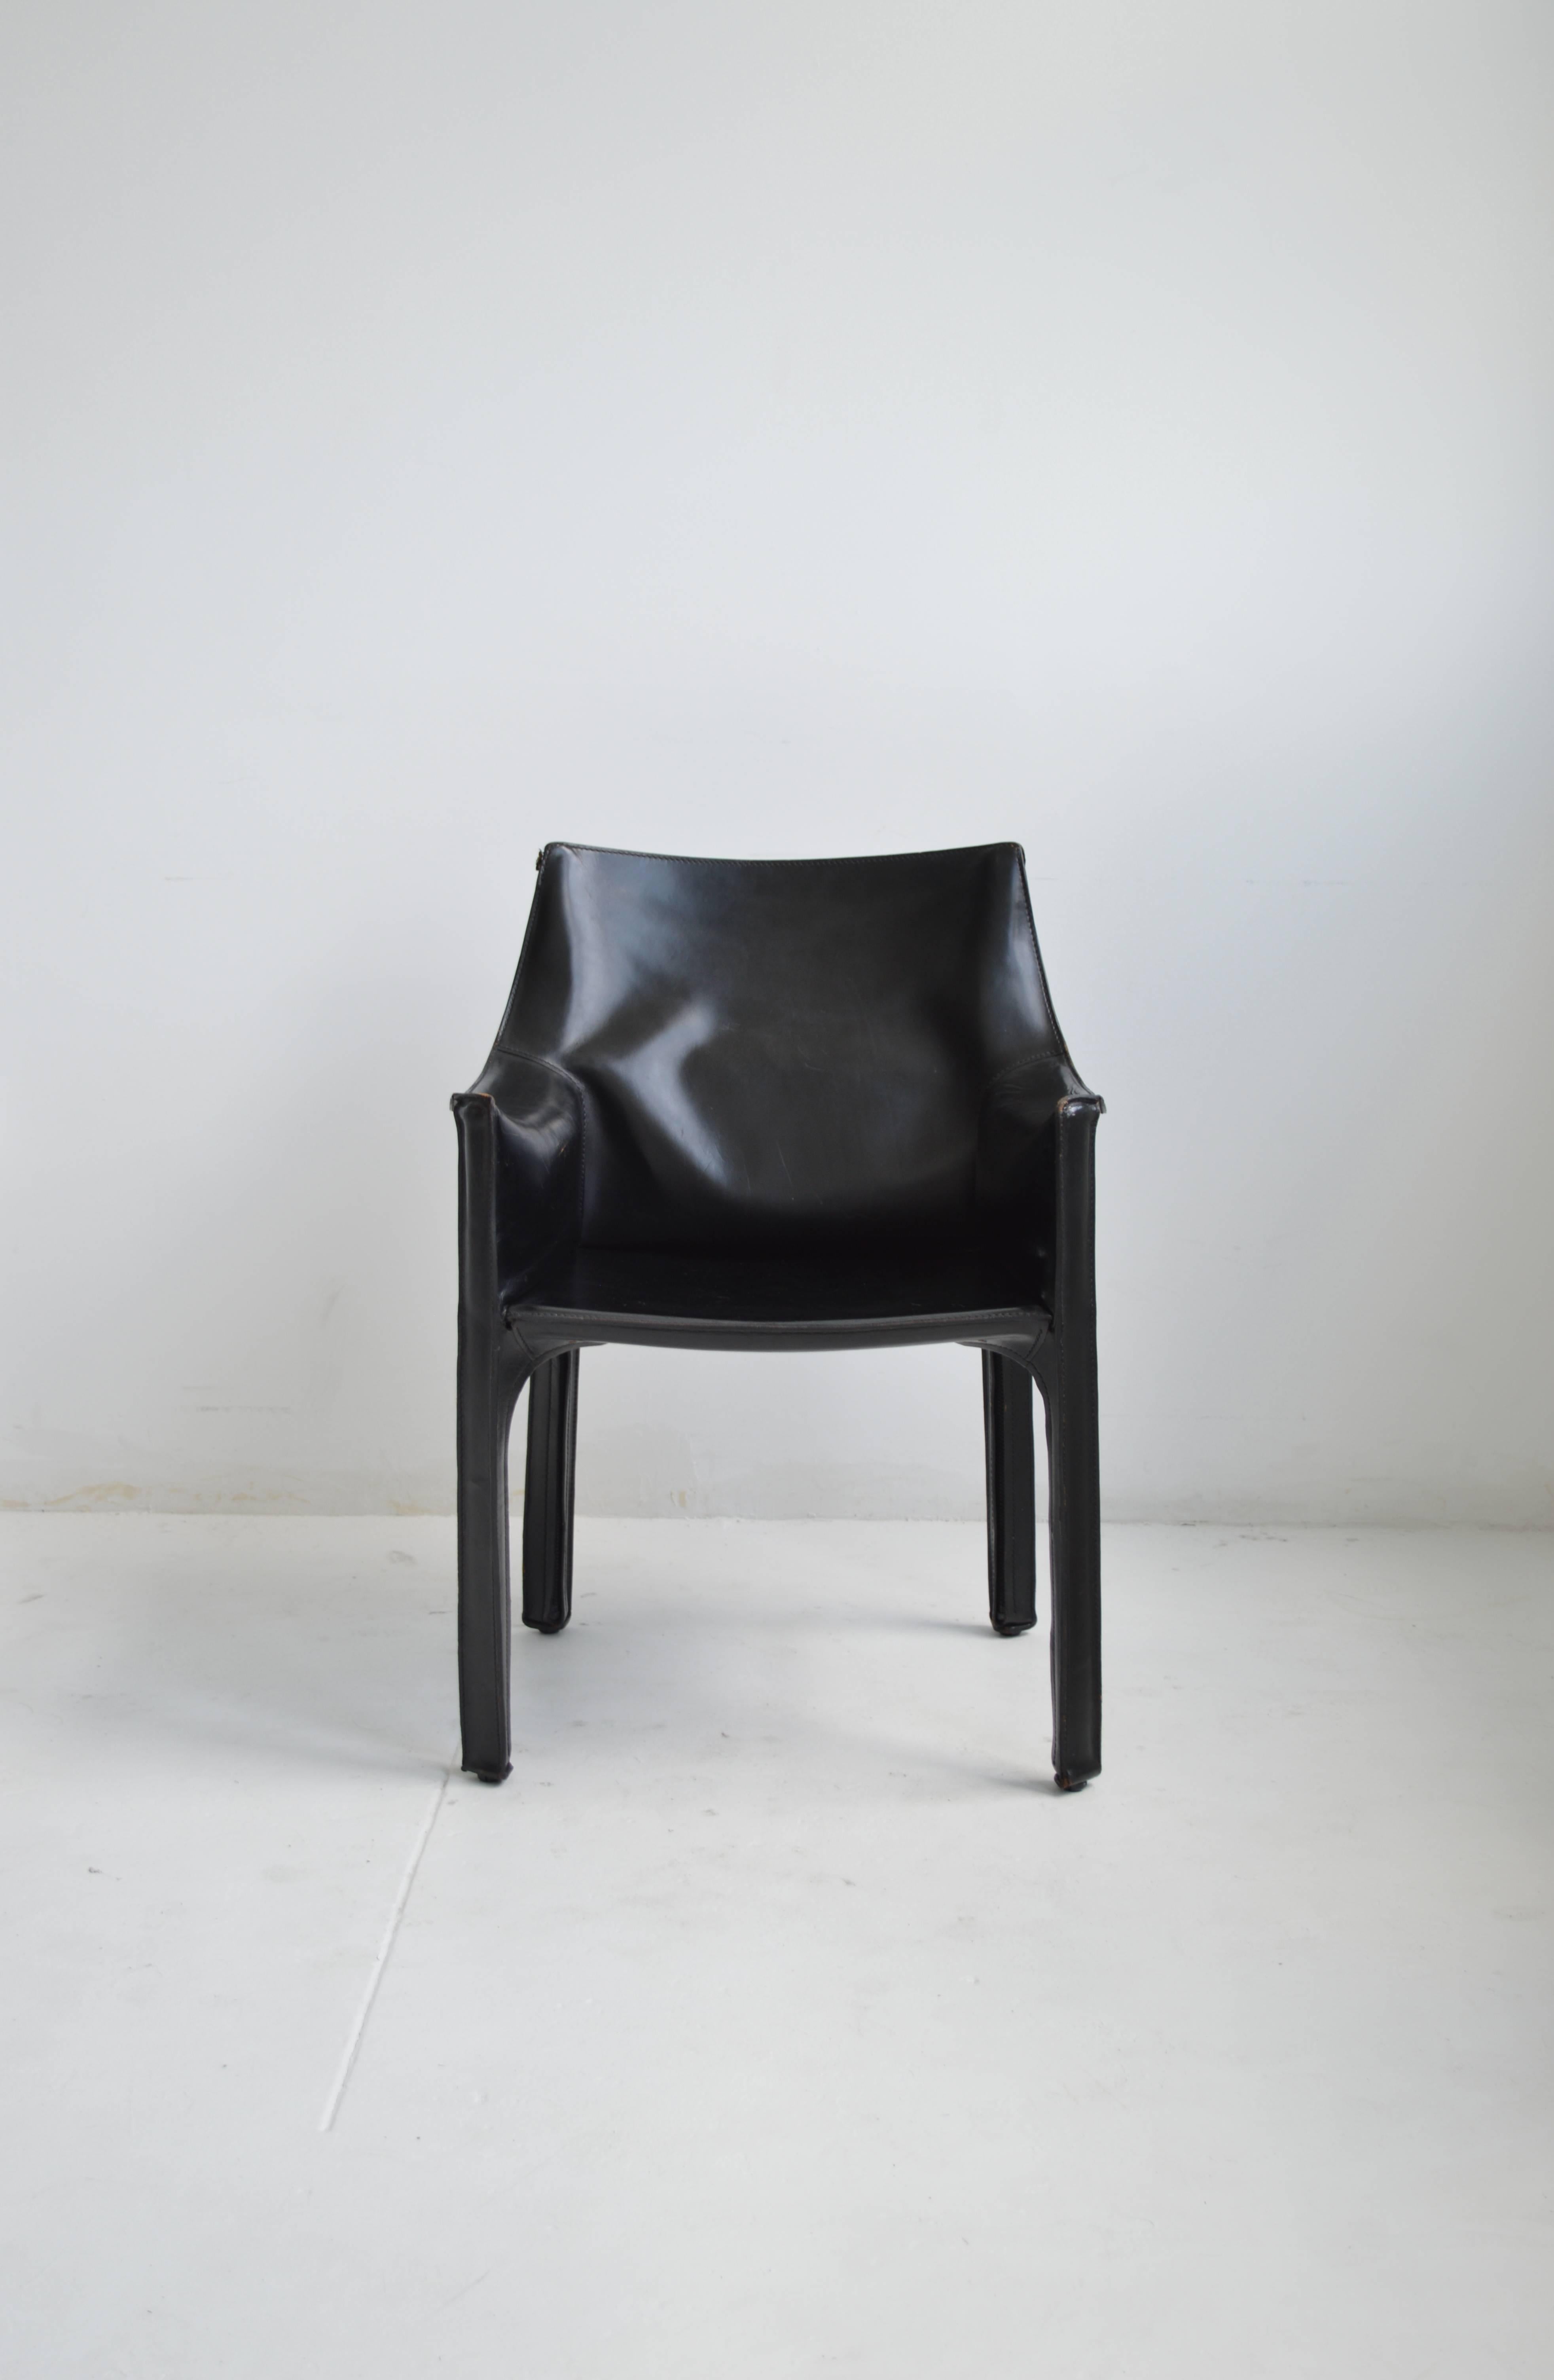 Mario Bellini 'Cab' chair for Italian manufacturer Cassina in the 1970's. This chair features a black saddle leather over a steel frame. Four zippers run beneath the chair's legs. There is some visible wear along the seams creating a lovely patina